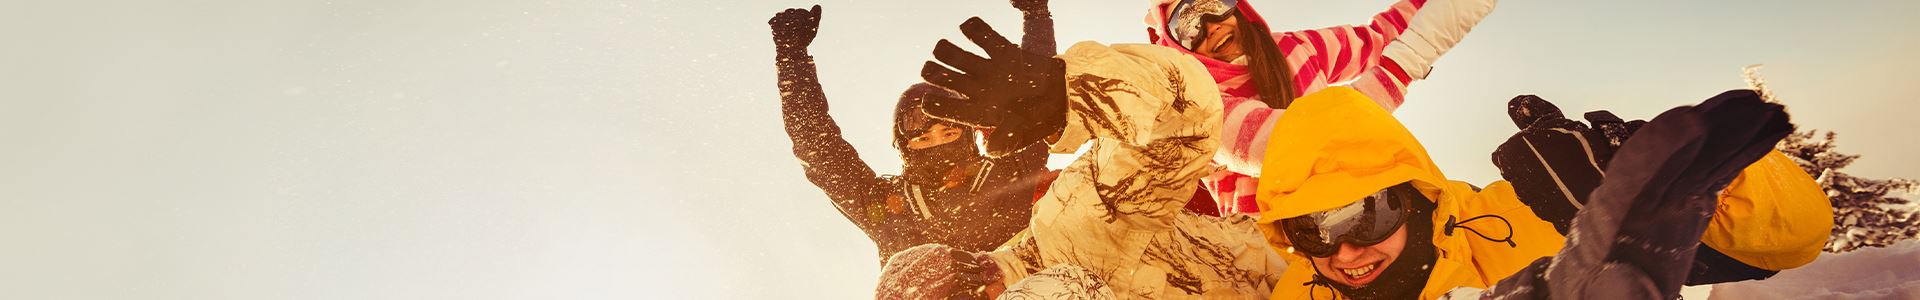 Photography displaying a group of four friends "heaped," waving with their hands to those who see the image and displaying smiling faces. They are all well equipped with snow gear, which includes: eye mask and warm and waterproof clothing and gloves.